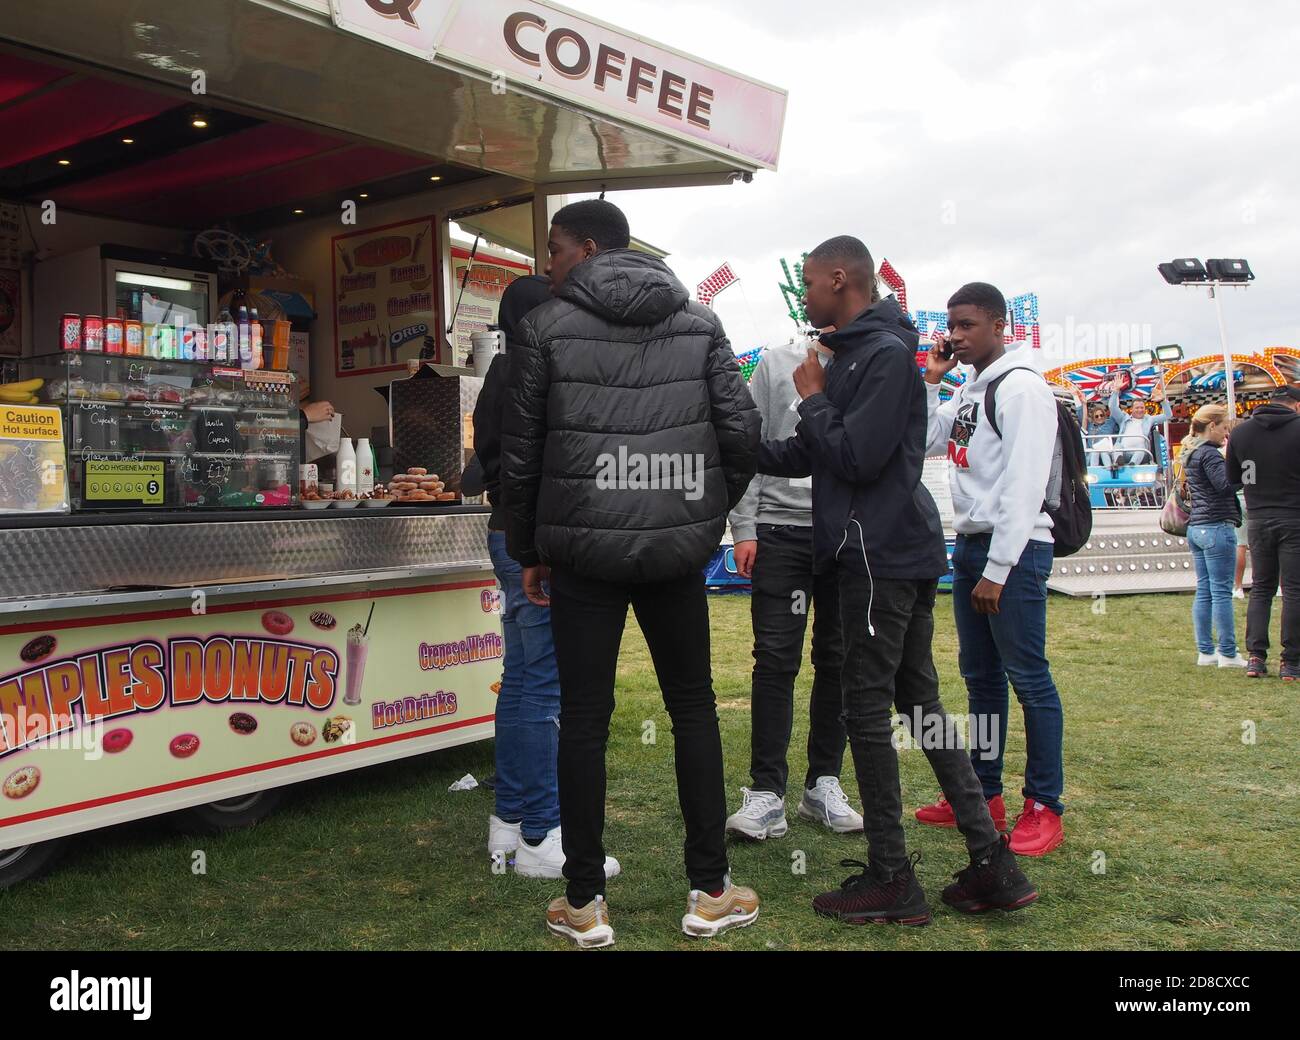 Male teenagers at a coffee stall at a fairground Stock Photo